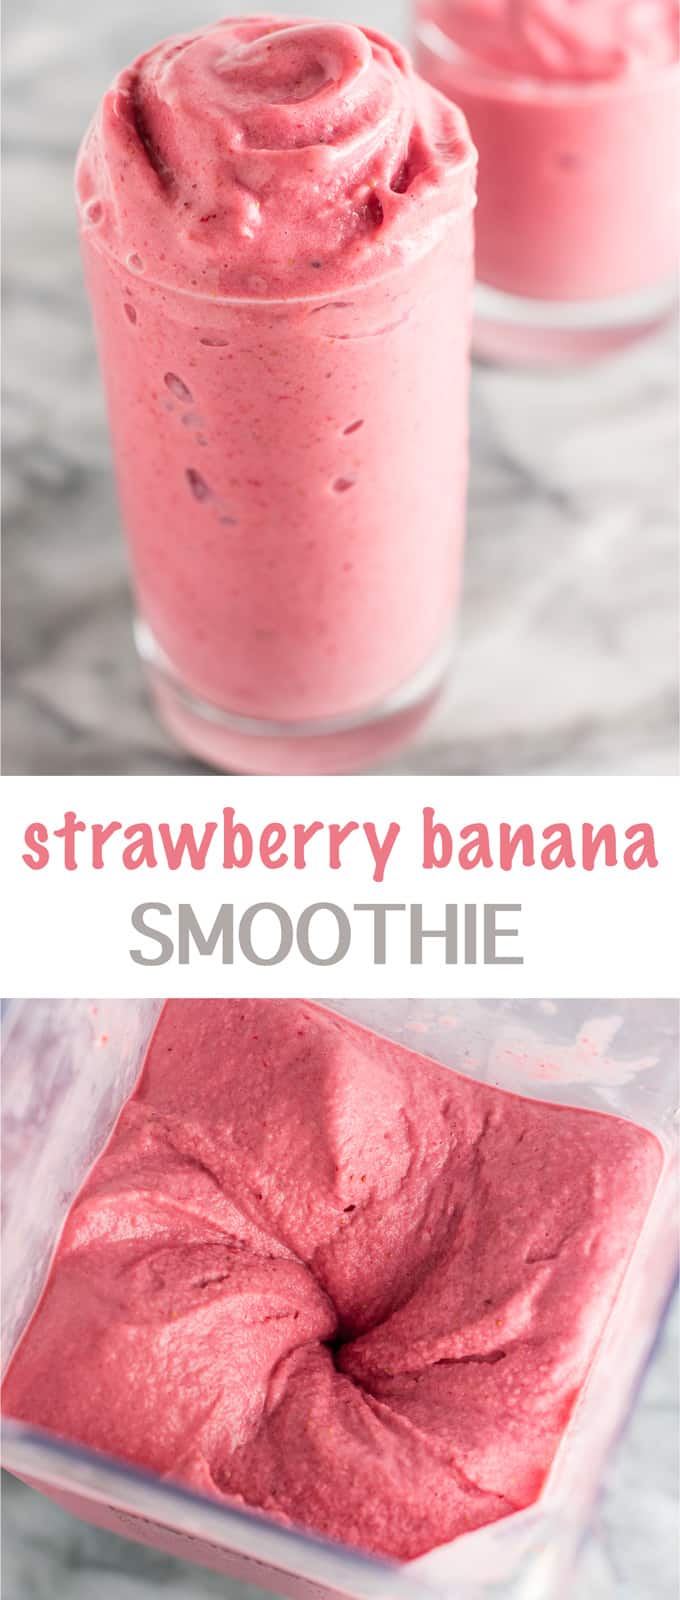 How To Make A Healthy Strawberry Banana Smoothie 